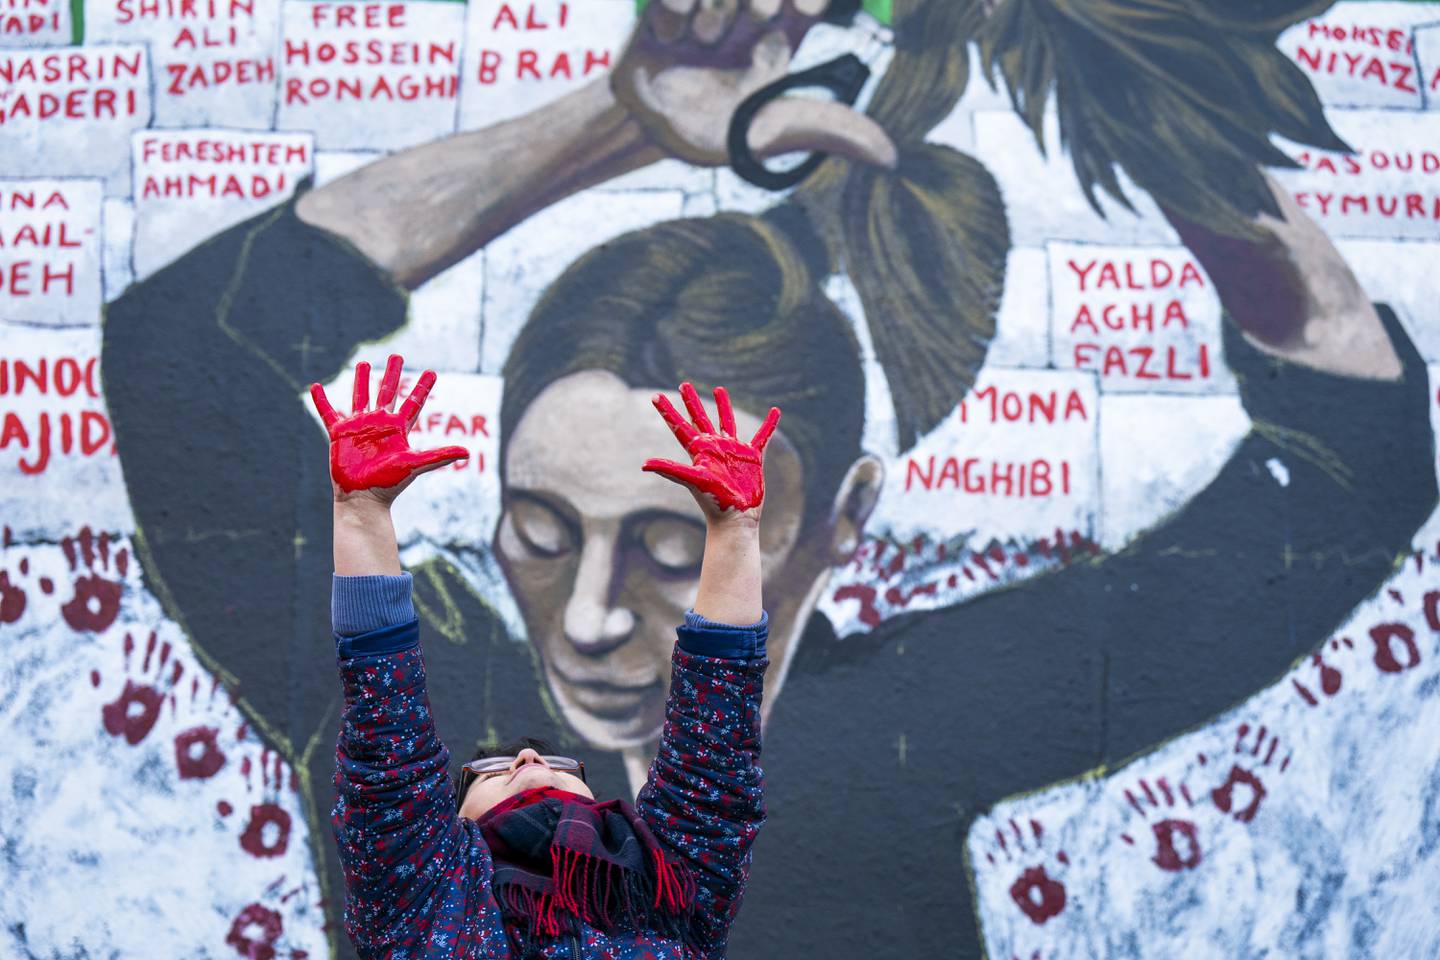 An Iranian woman helps to create the Women Life Freedom mural in Edinburgh, Members of the public are being invited to add their hand-print to the artwork to help raise awareness about the ongoing uprising in Iran. PA